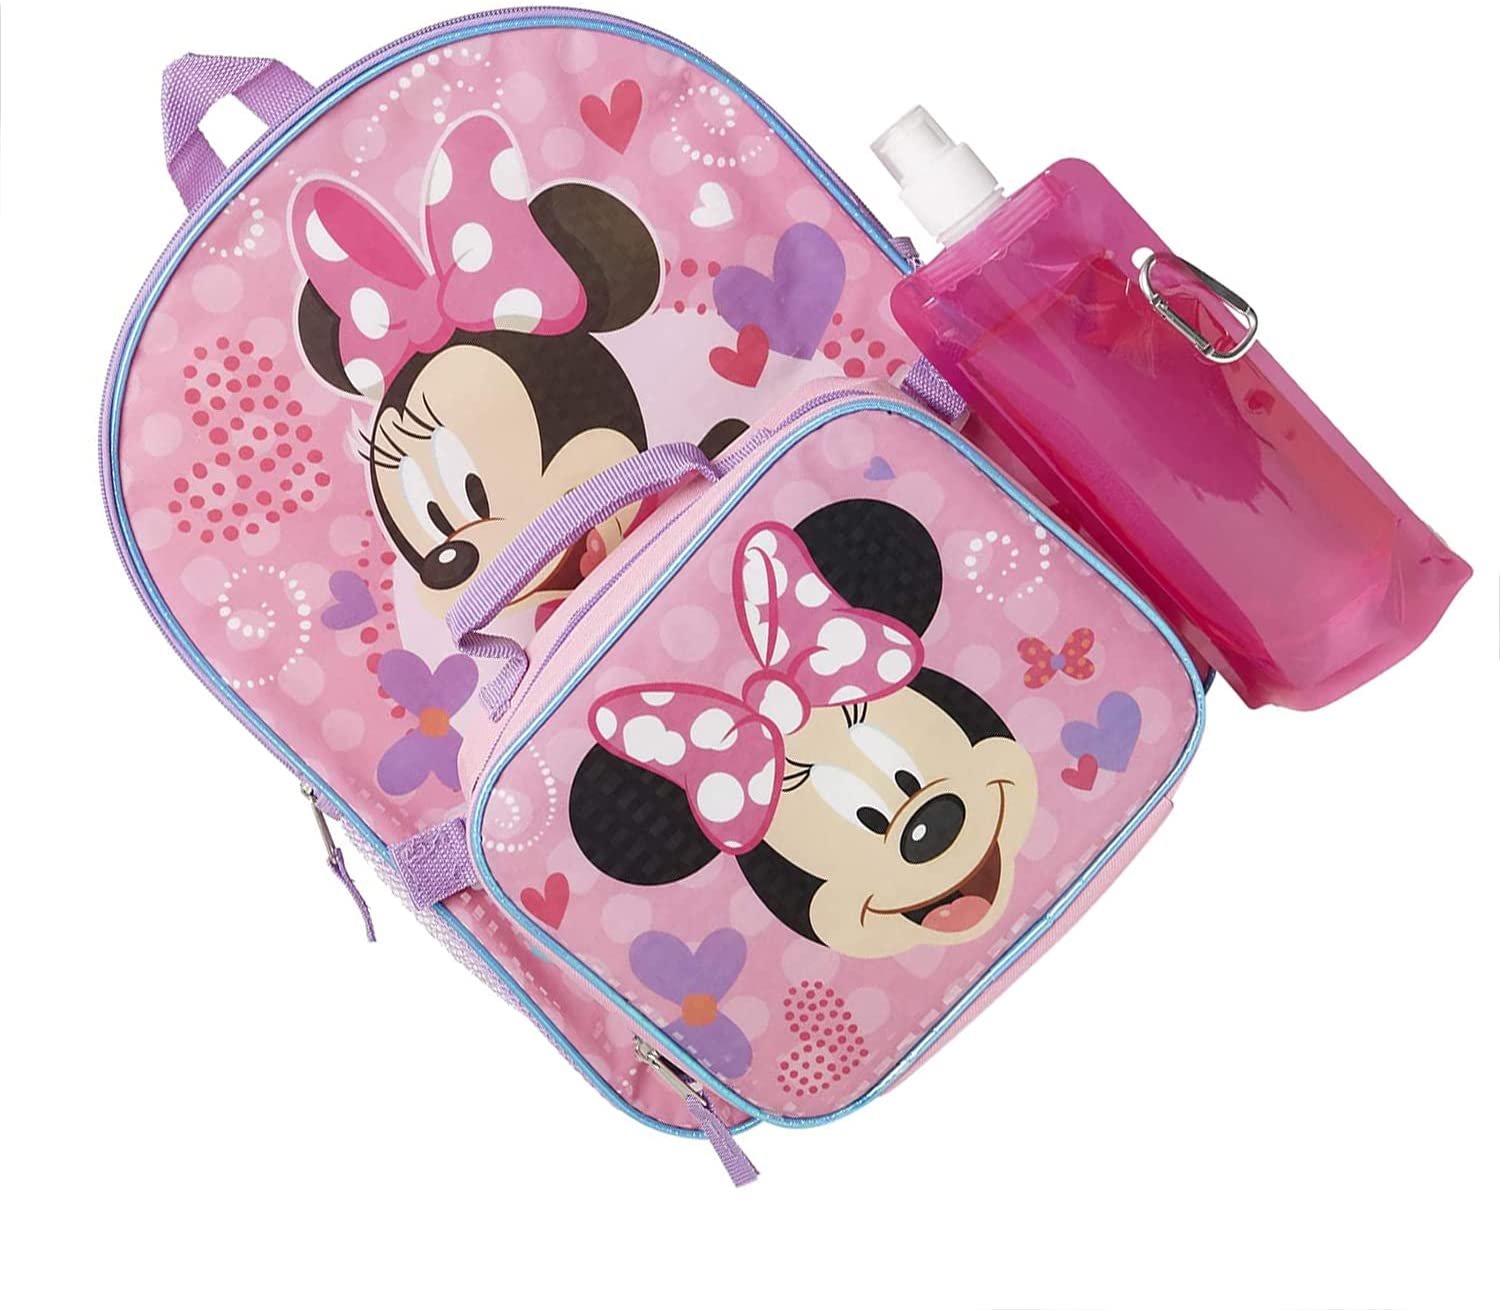 Minnie Mouse Backpack Combo Set - Minnie Mouse Girls 4 Piece Backpack Set - Backpack, Lunch Box, Water Bottle And Carabina Minnie Mouse 4Pc - image 5 of 7